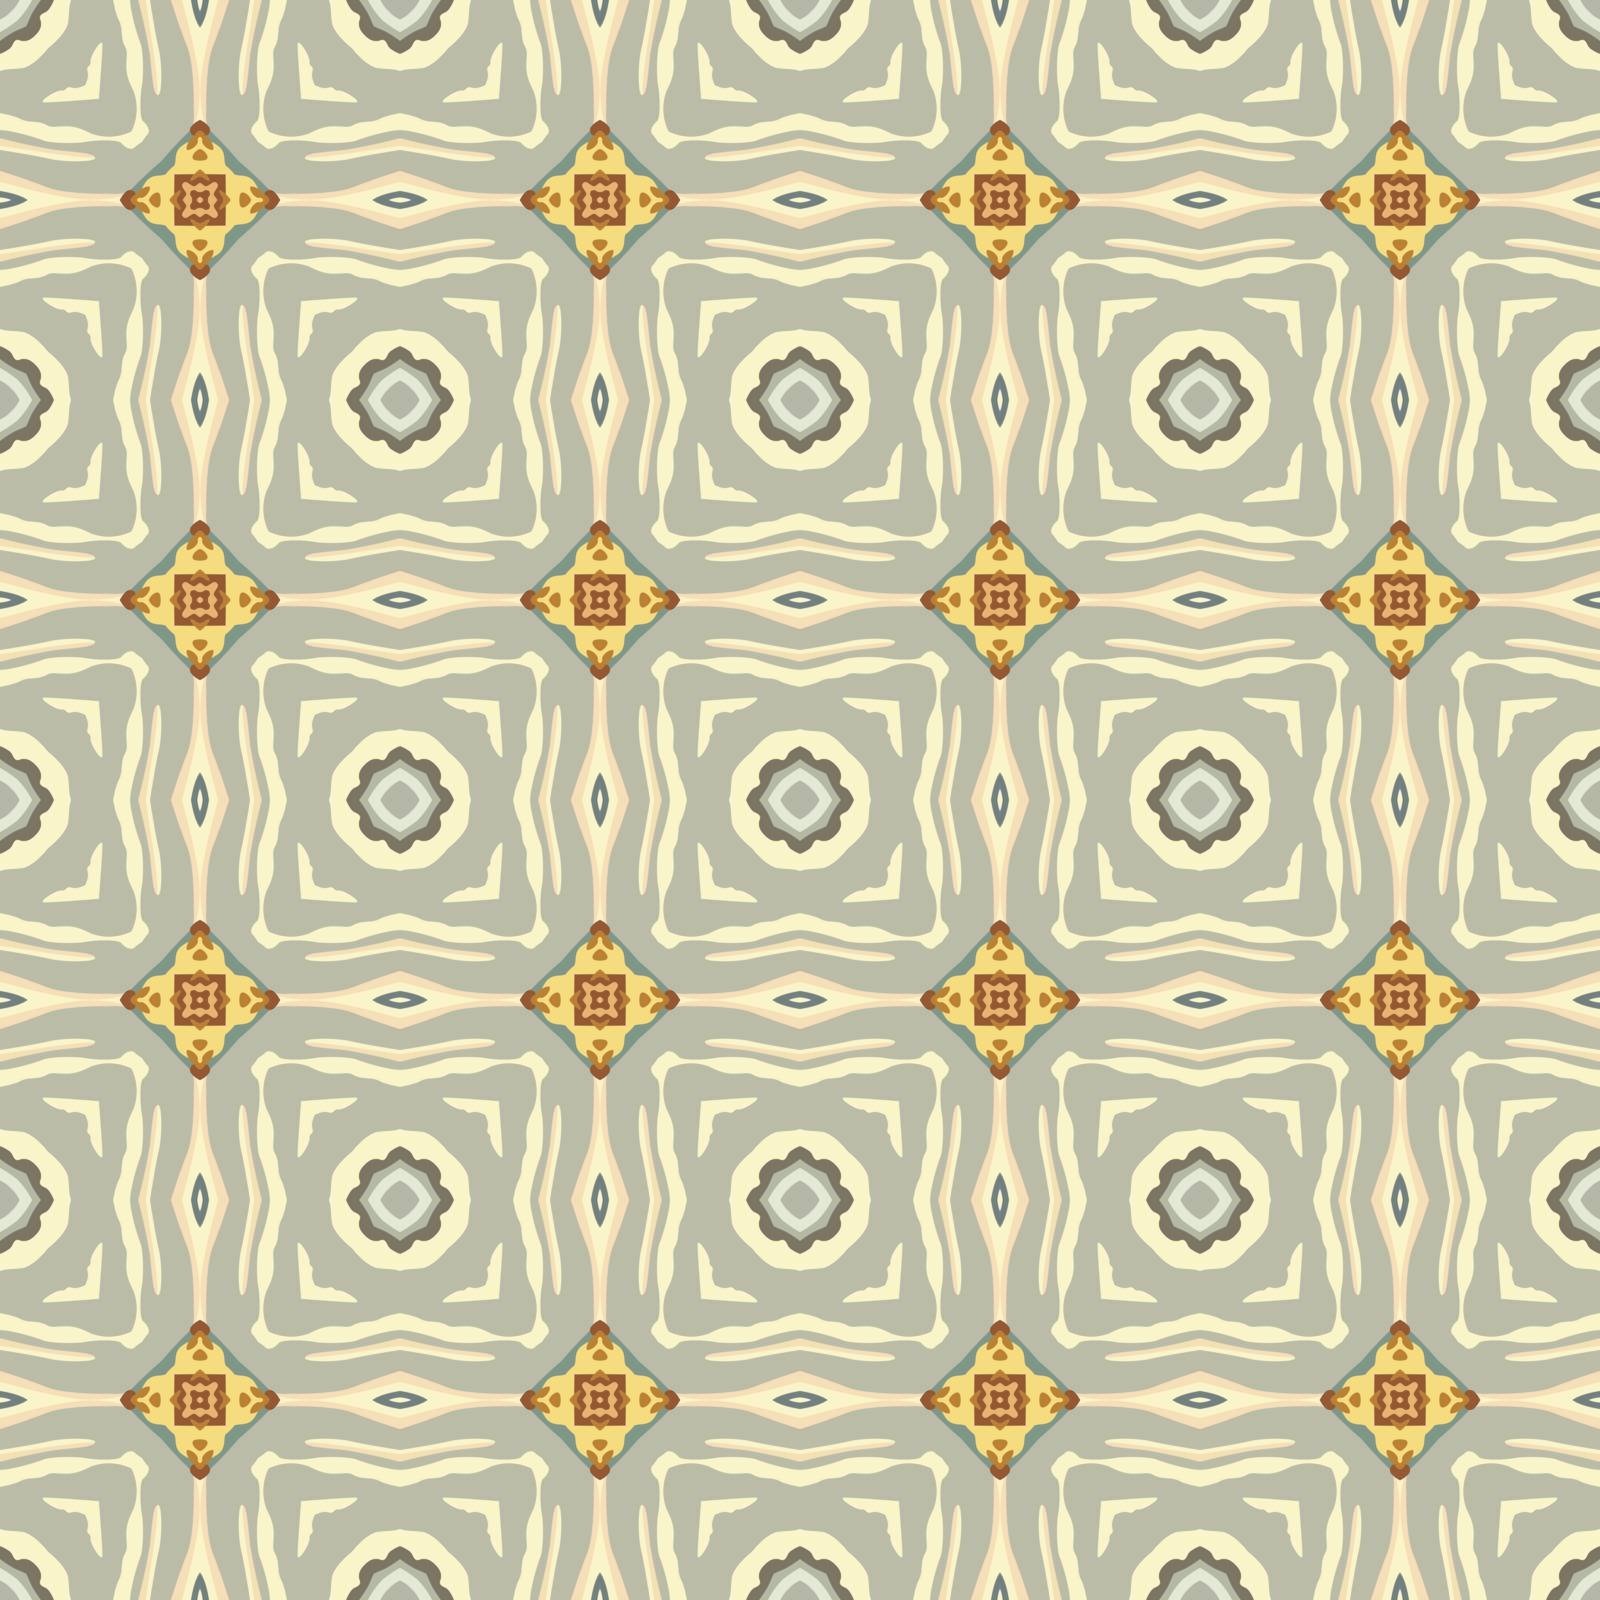 Seamless illustrated pattern made of abstract elements in beige, gray, turquoise, yellow and brown